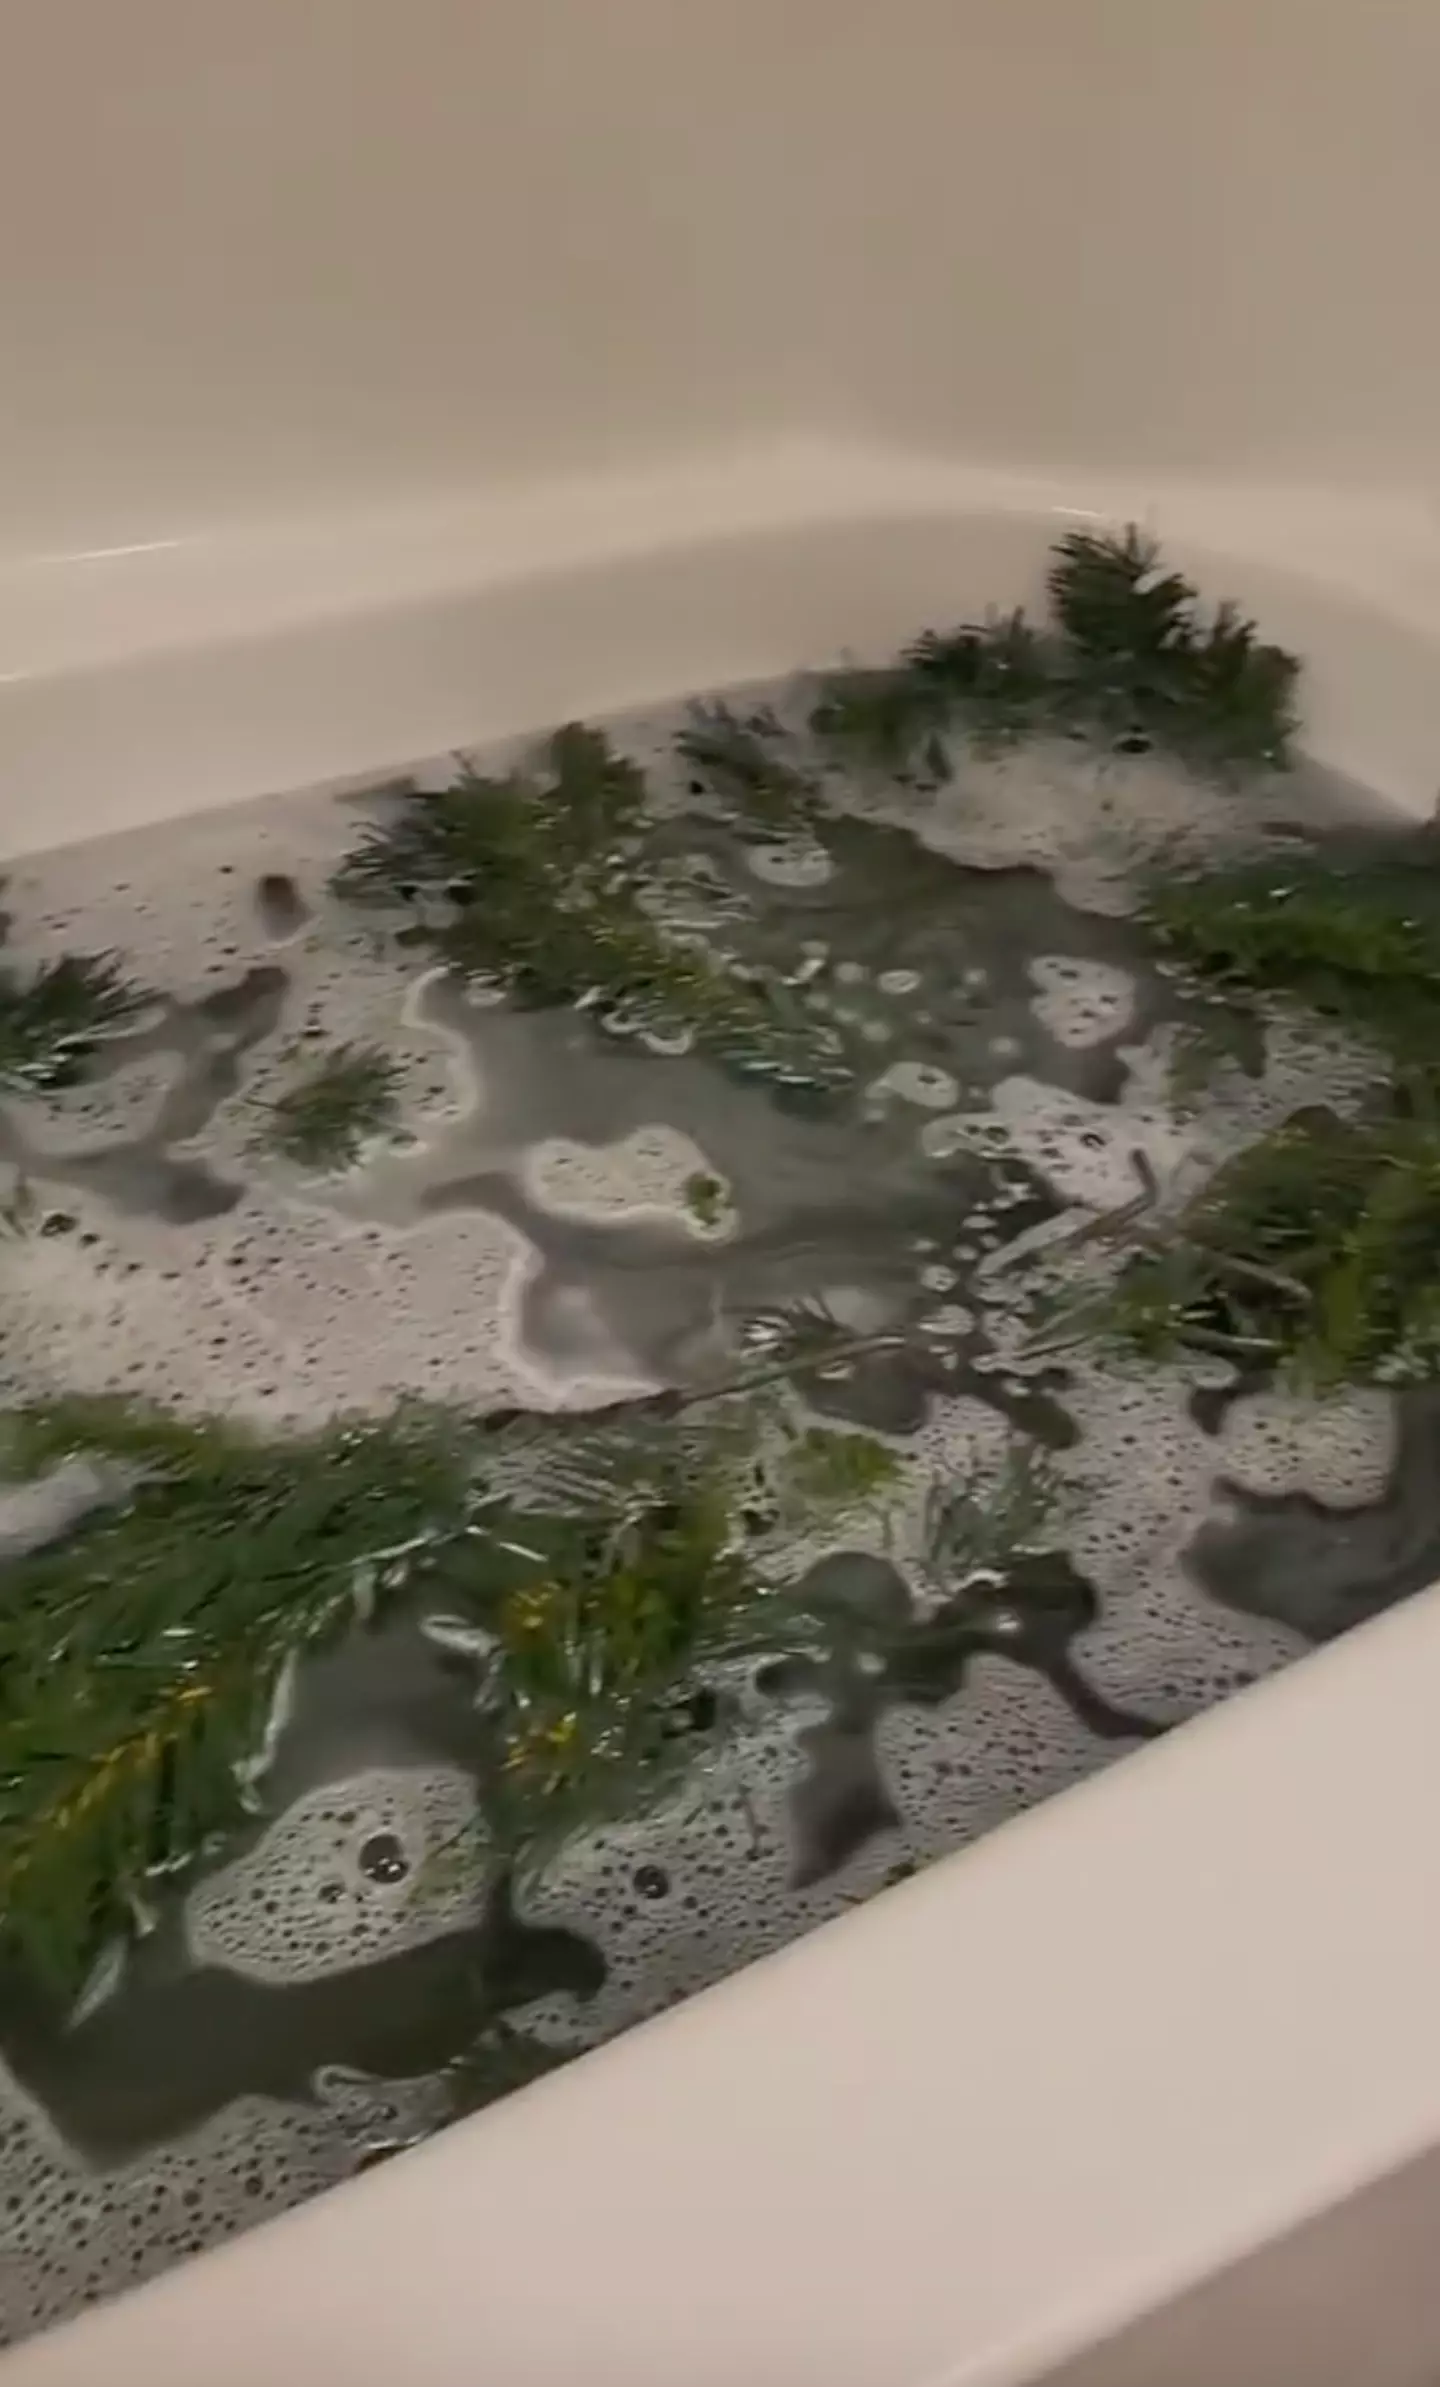 One woman washed her artificial Christmas tree in the bath.